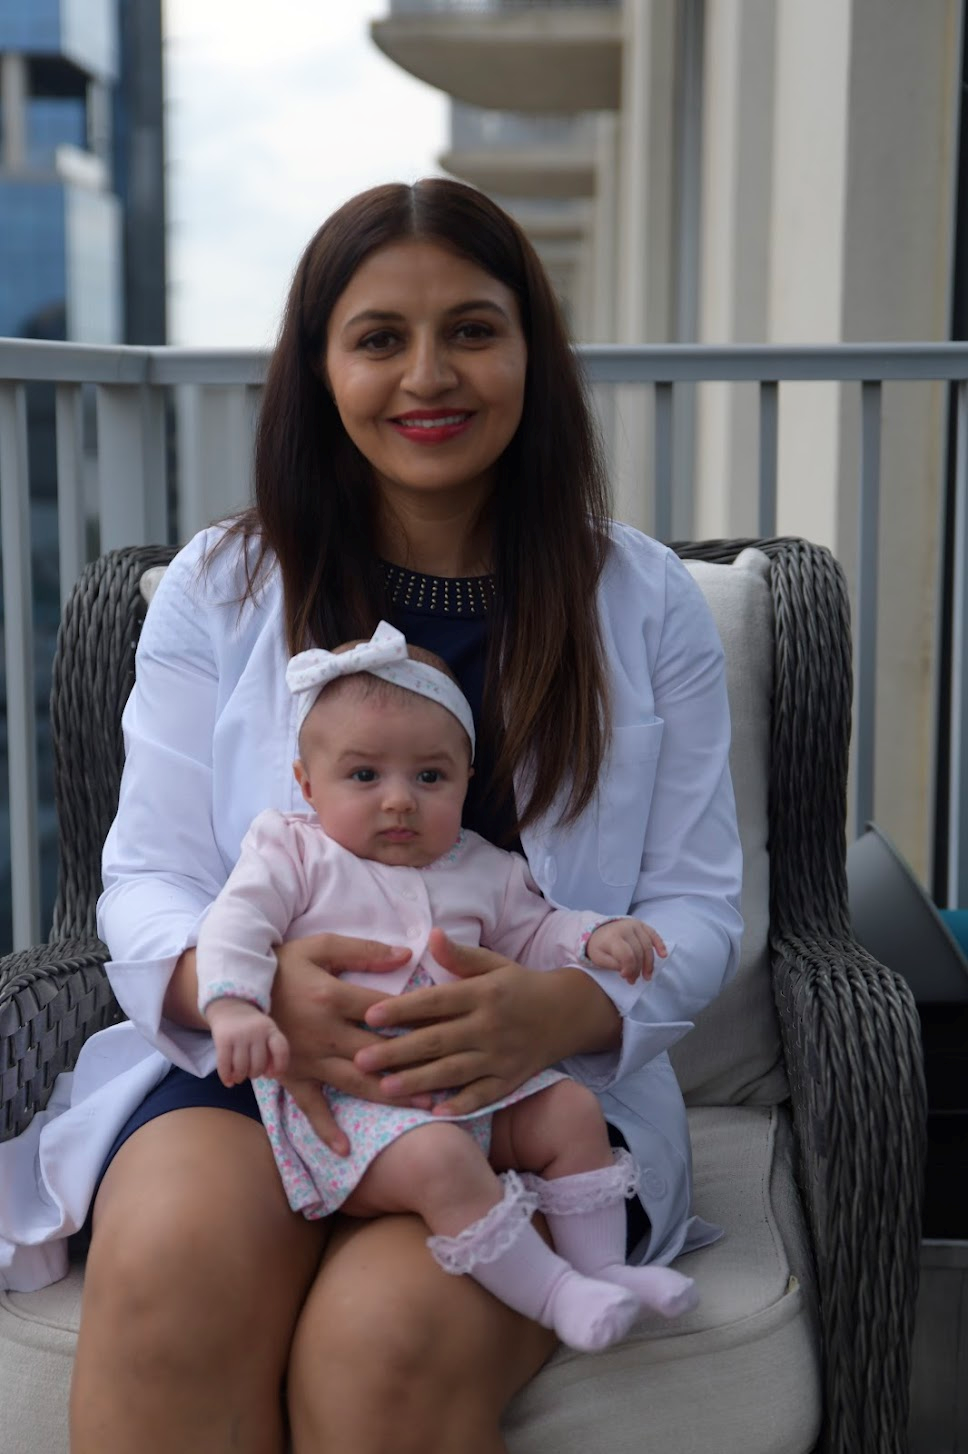 A female Doctor in white apron is with baby girl sitting on sofa